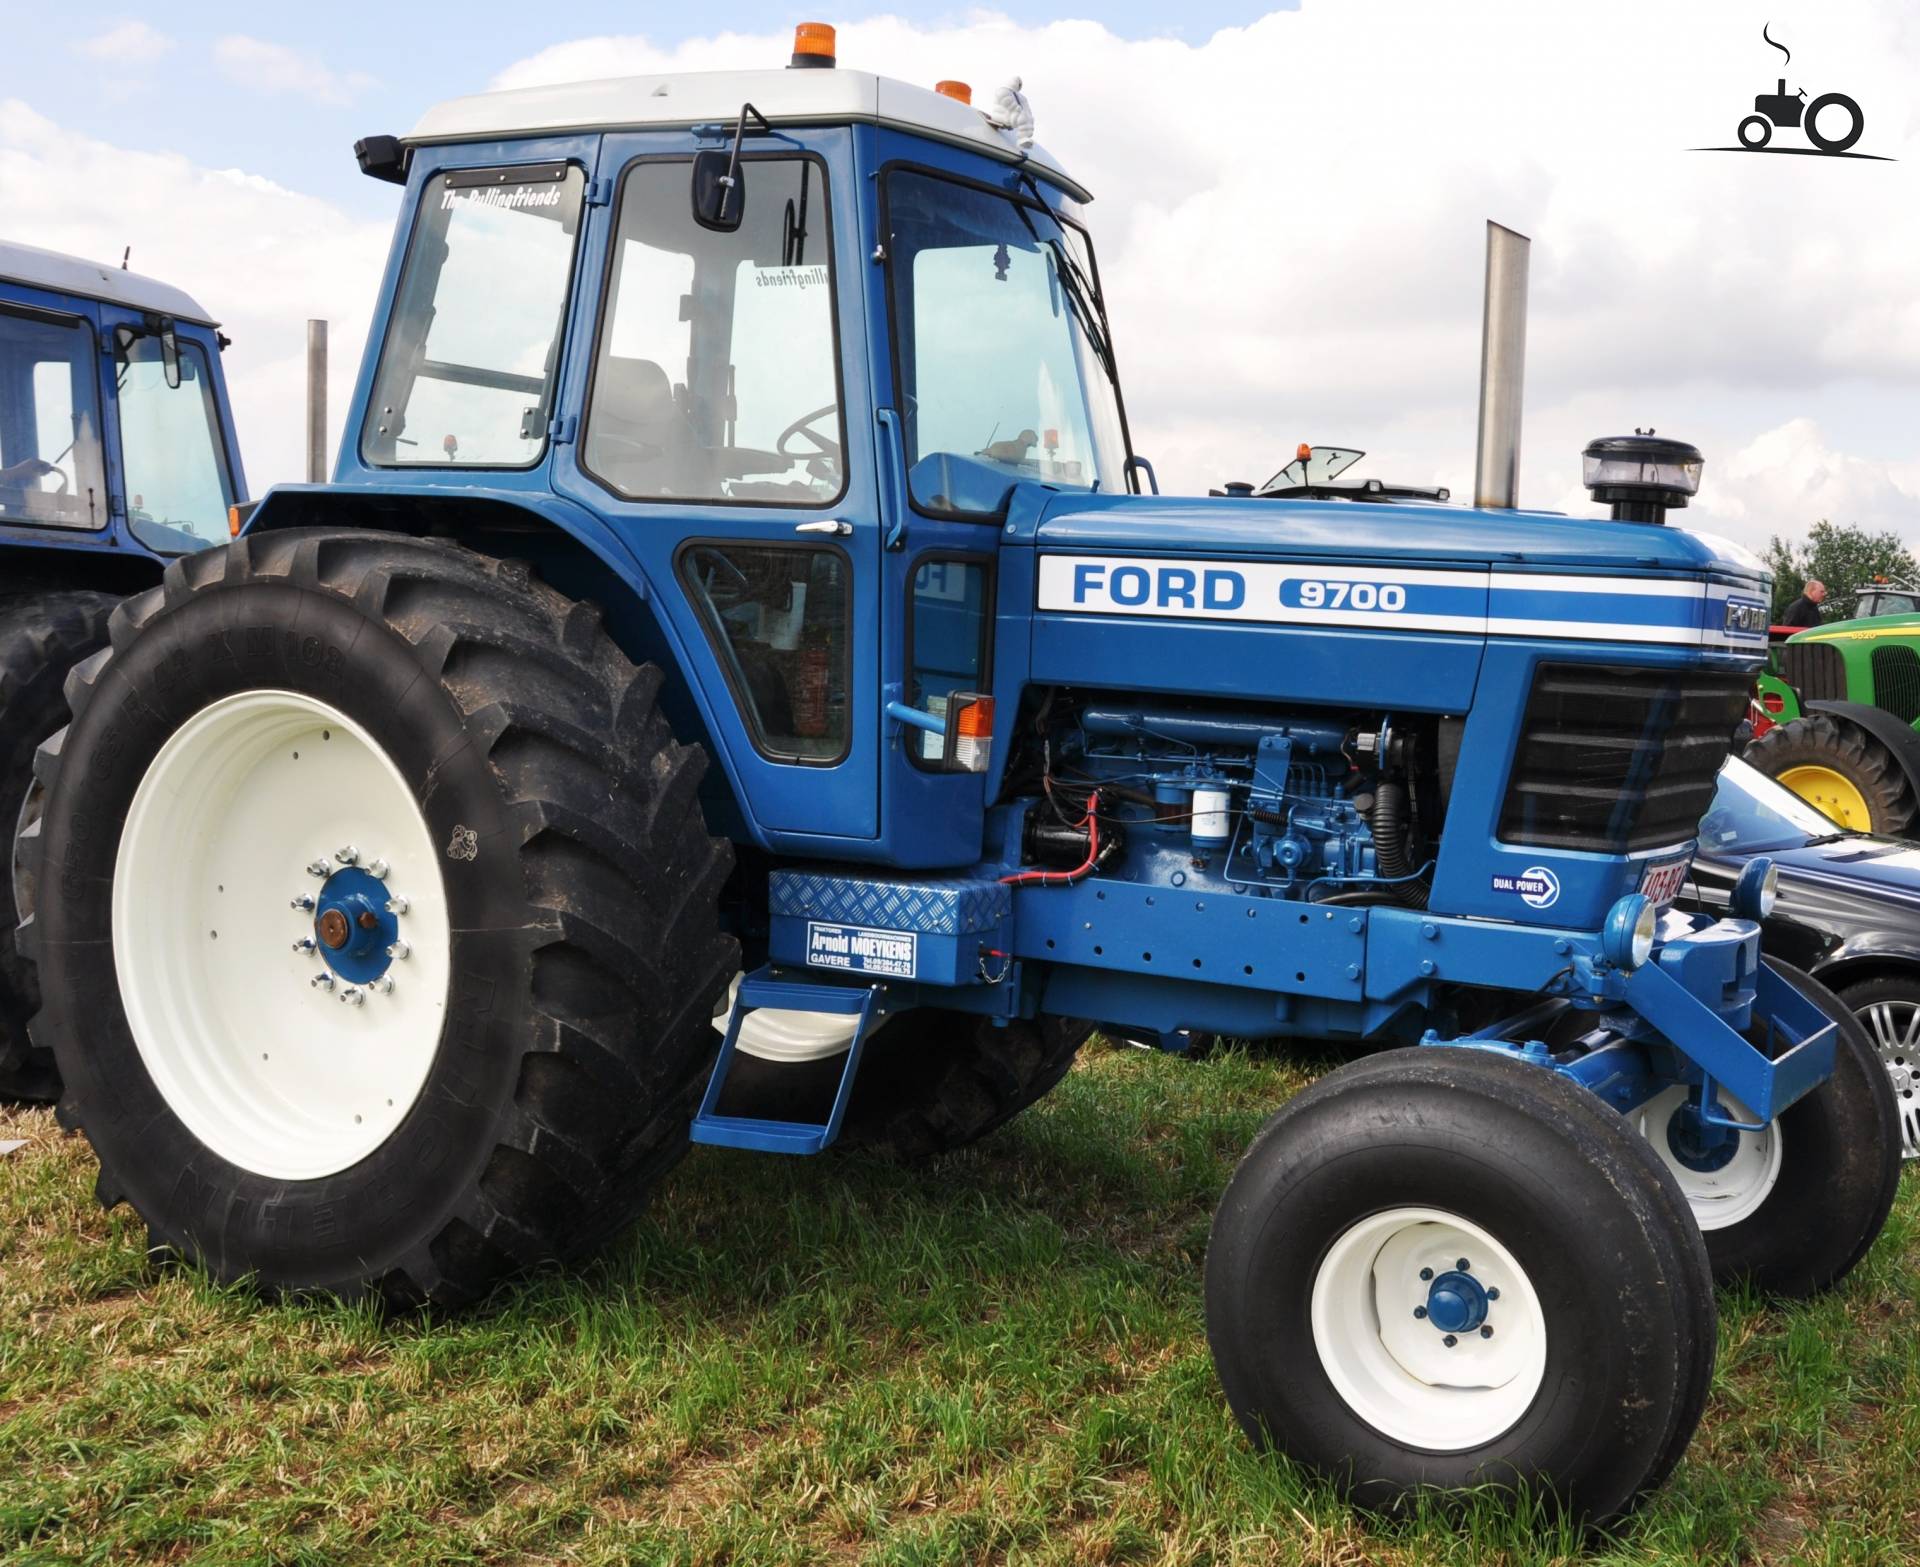 Ford 9700 Tractor Related Keywords & Suggestions - Ford 9700 Tractor ...